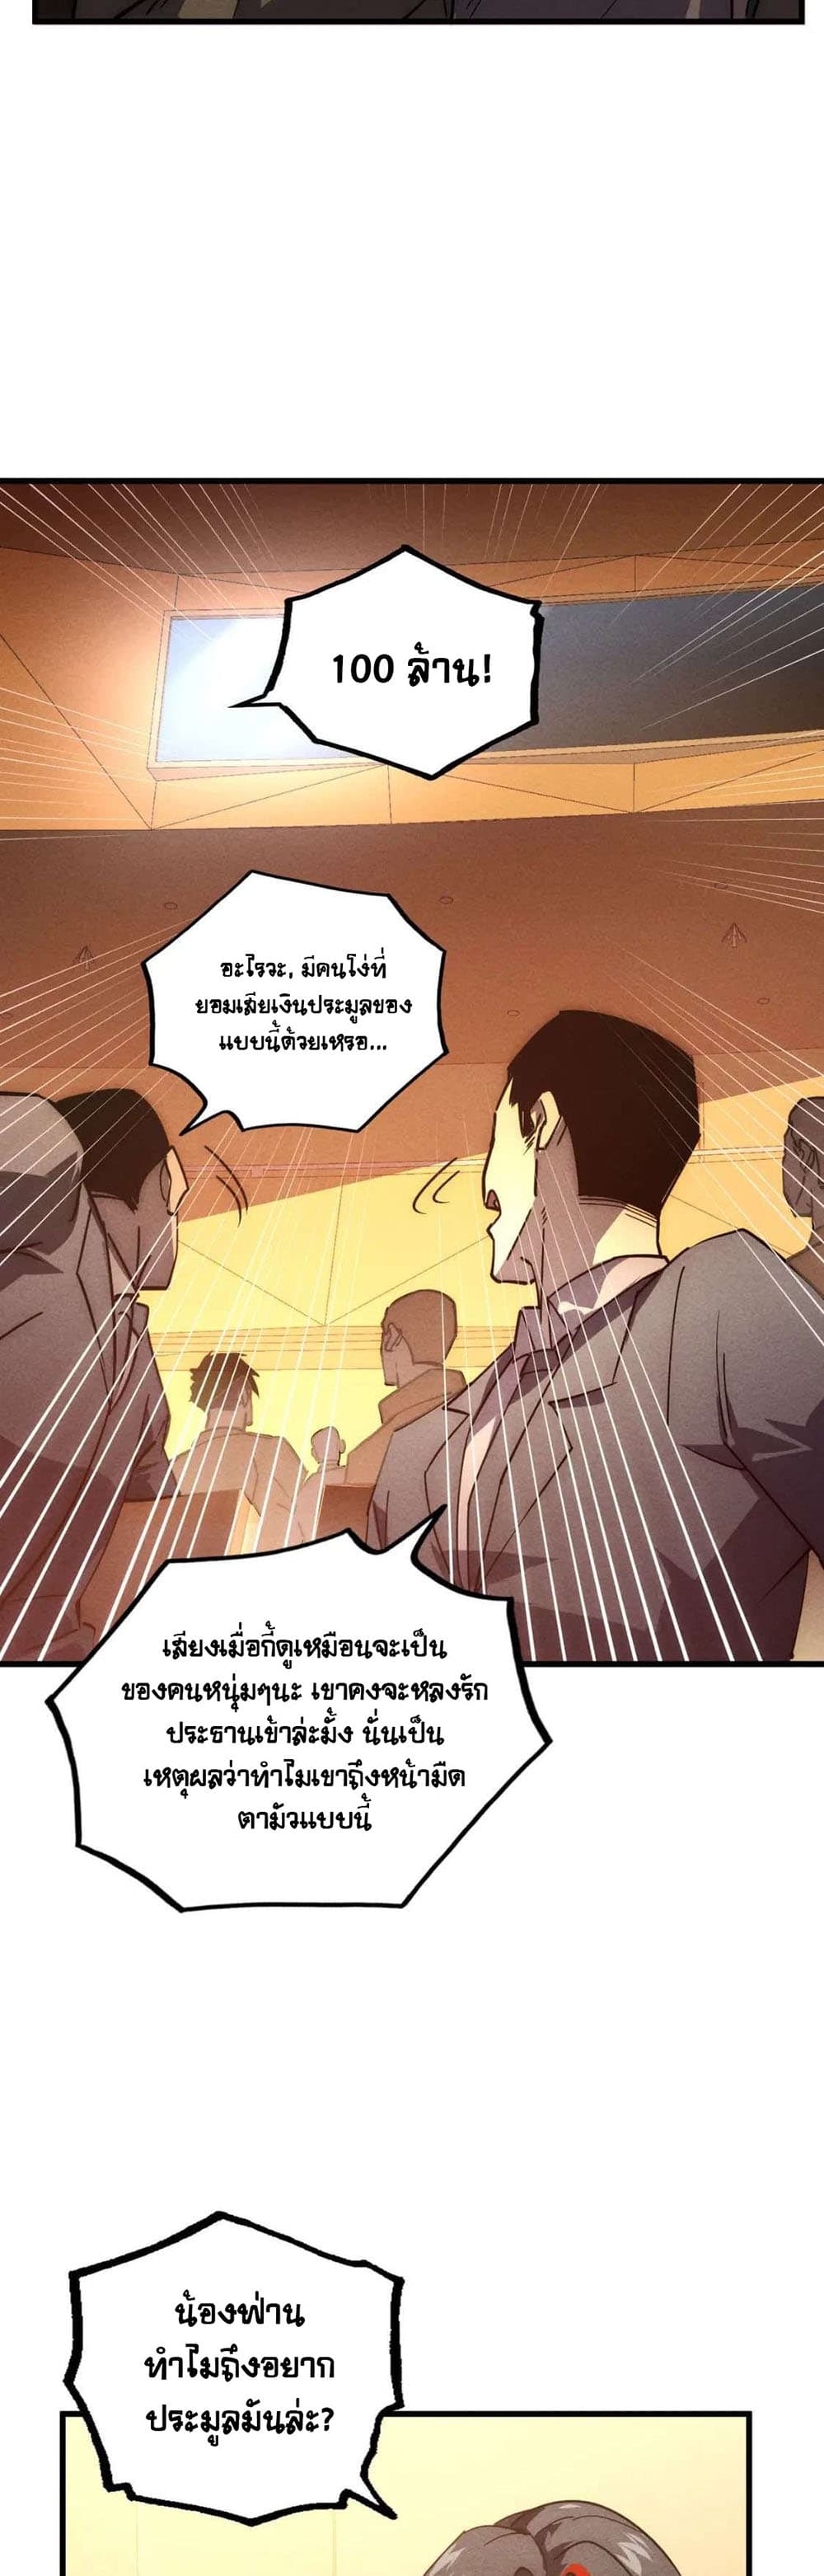 Rise From The Rubble เศษซากวันสิ้นโลก 178-178